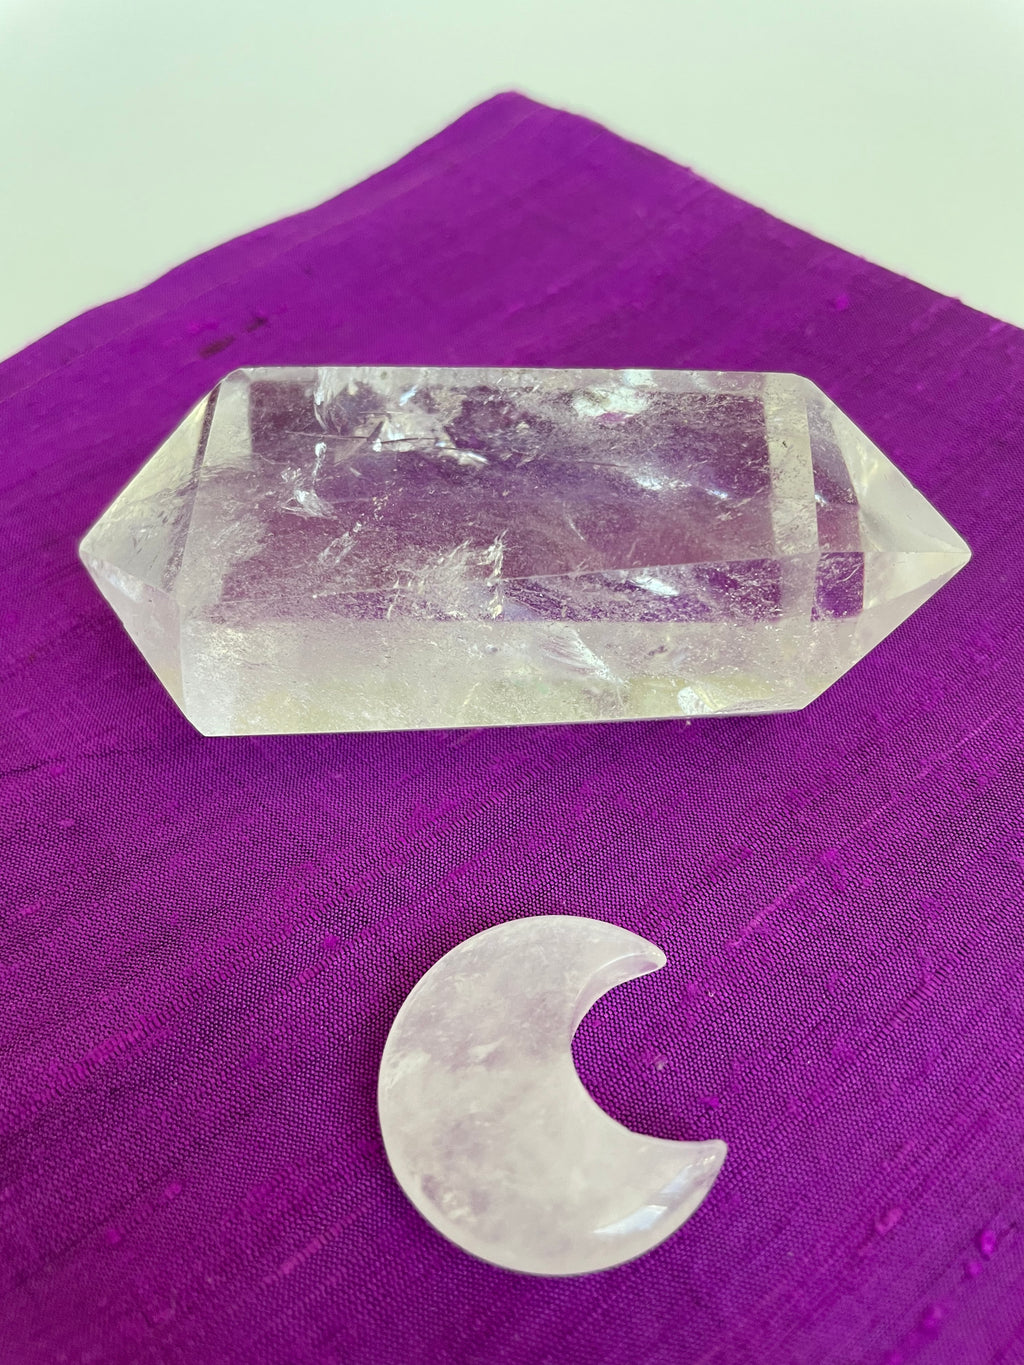 This powerful little quartz crystal crescent moon can be used for meditation, healing, for your altar, or as décor for any room in your home or office. Easy to slip right into your pocket so you can take the energy of quartz everywhere you go.  Quartz is the "most powerful healing and energy amplifier on the planet" (Judy Hall). Approx. 1¼". Cost is $6. 